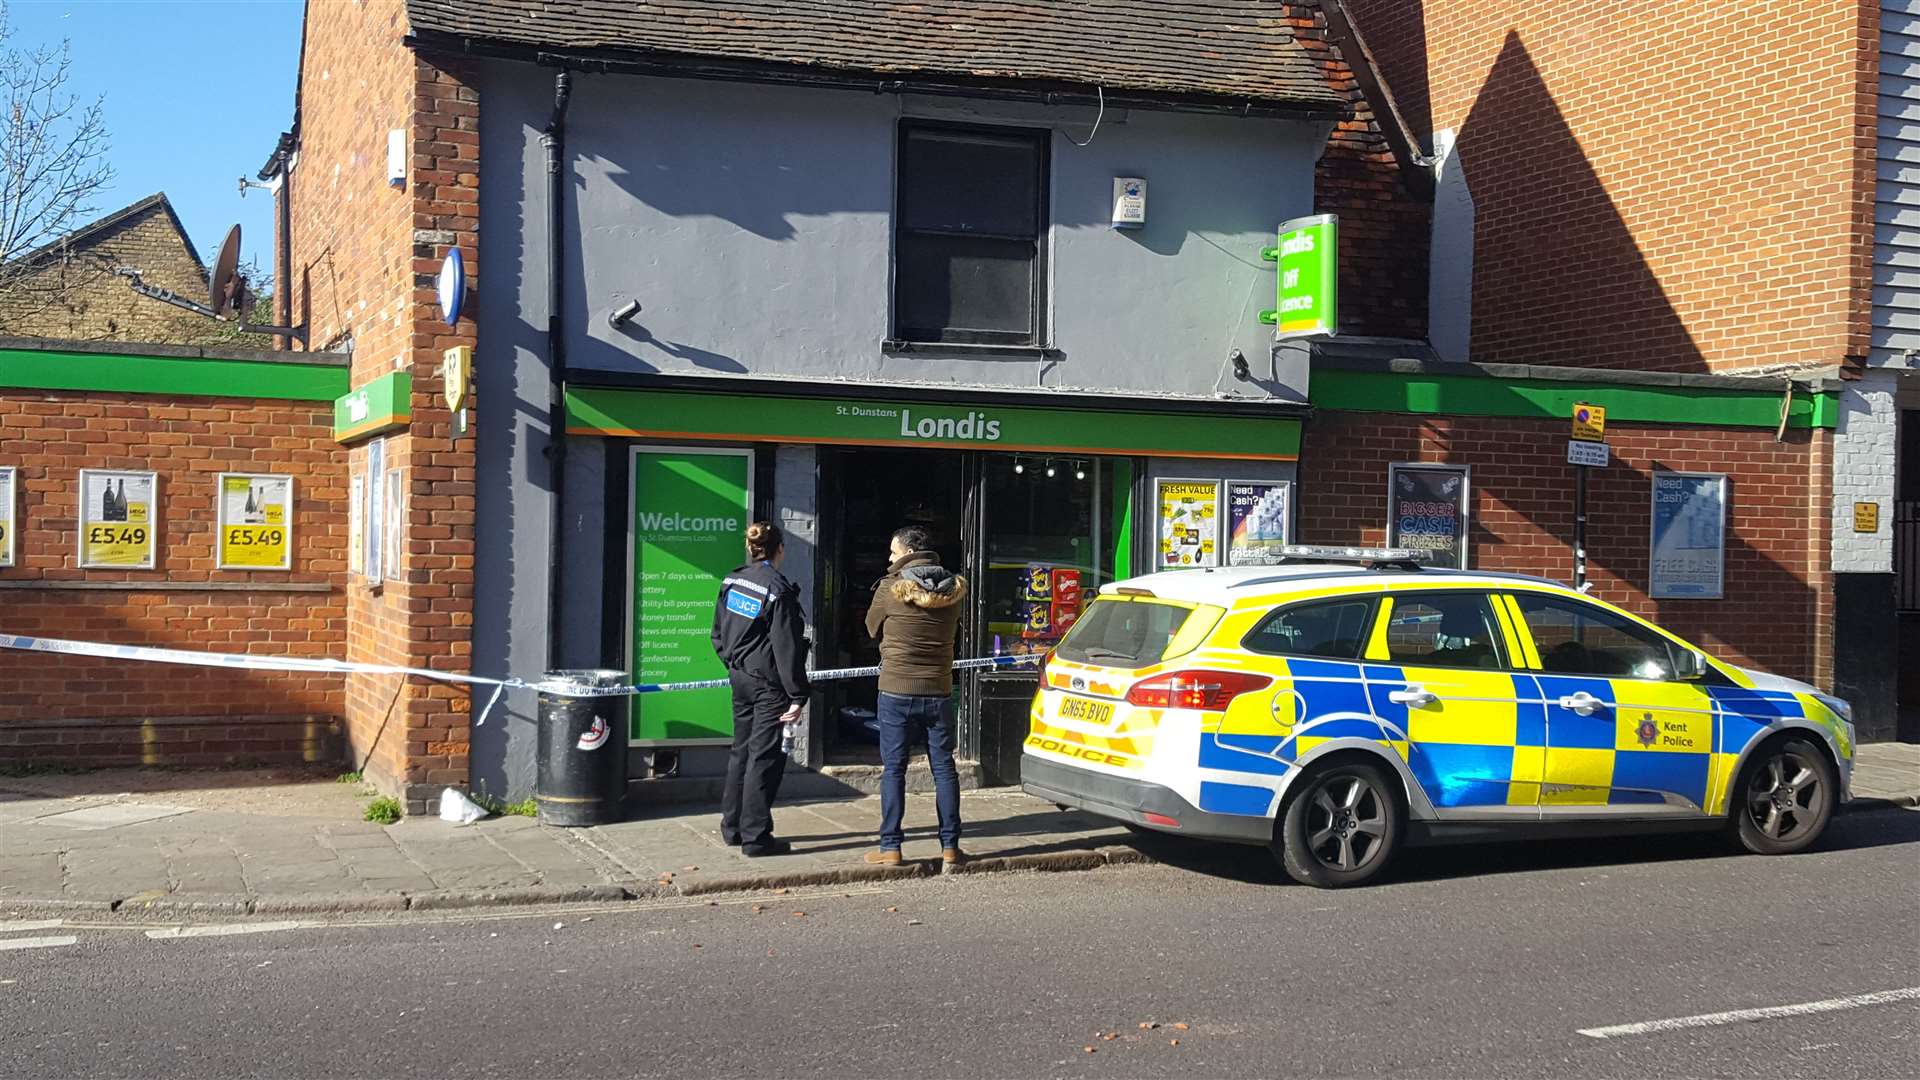 The scene of the raid at Londis in St Dunstan's, Canterbury (8092675)